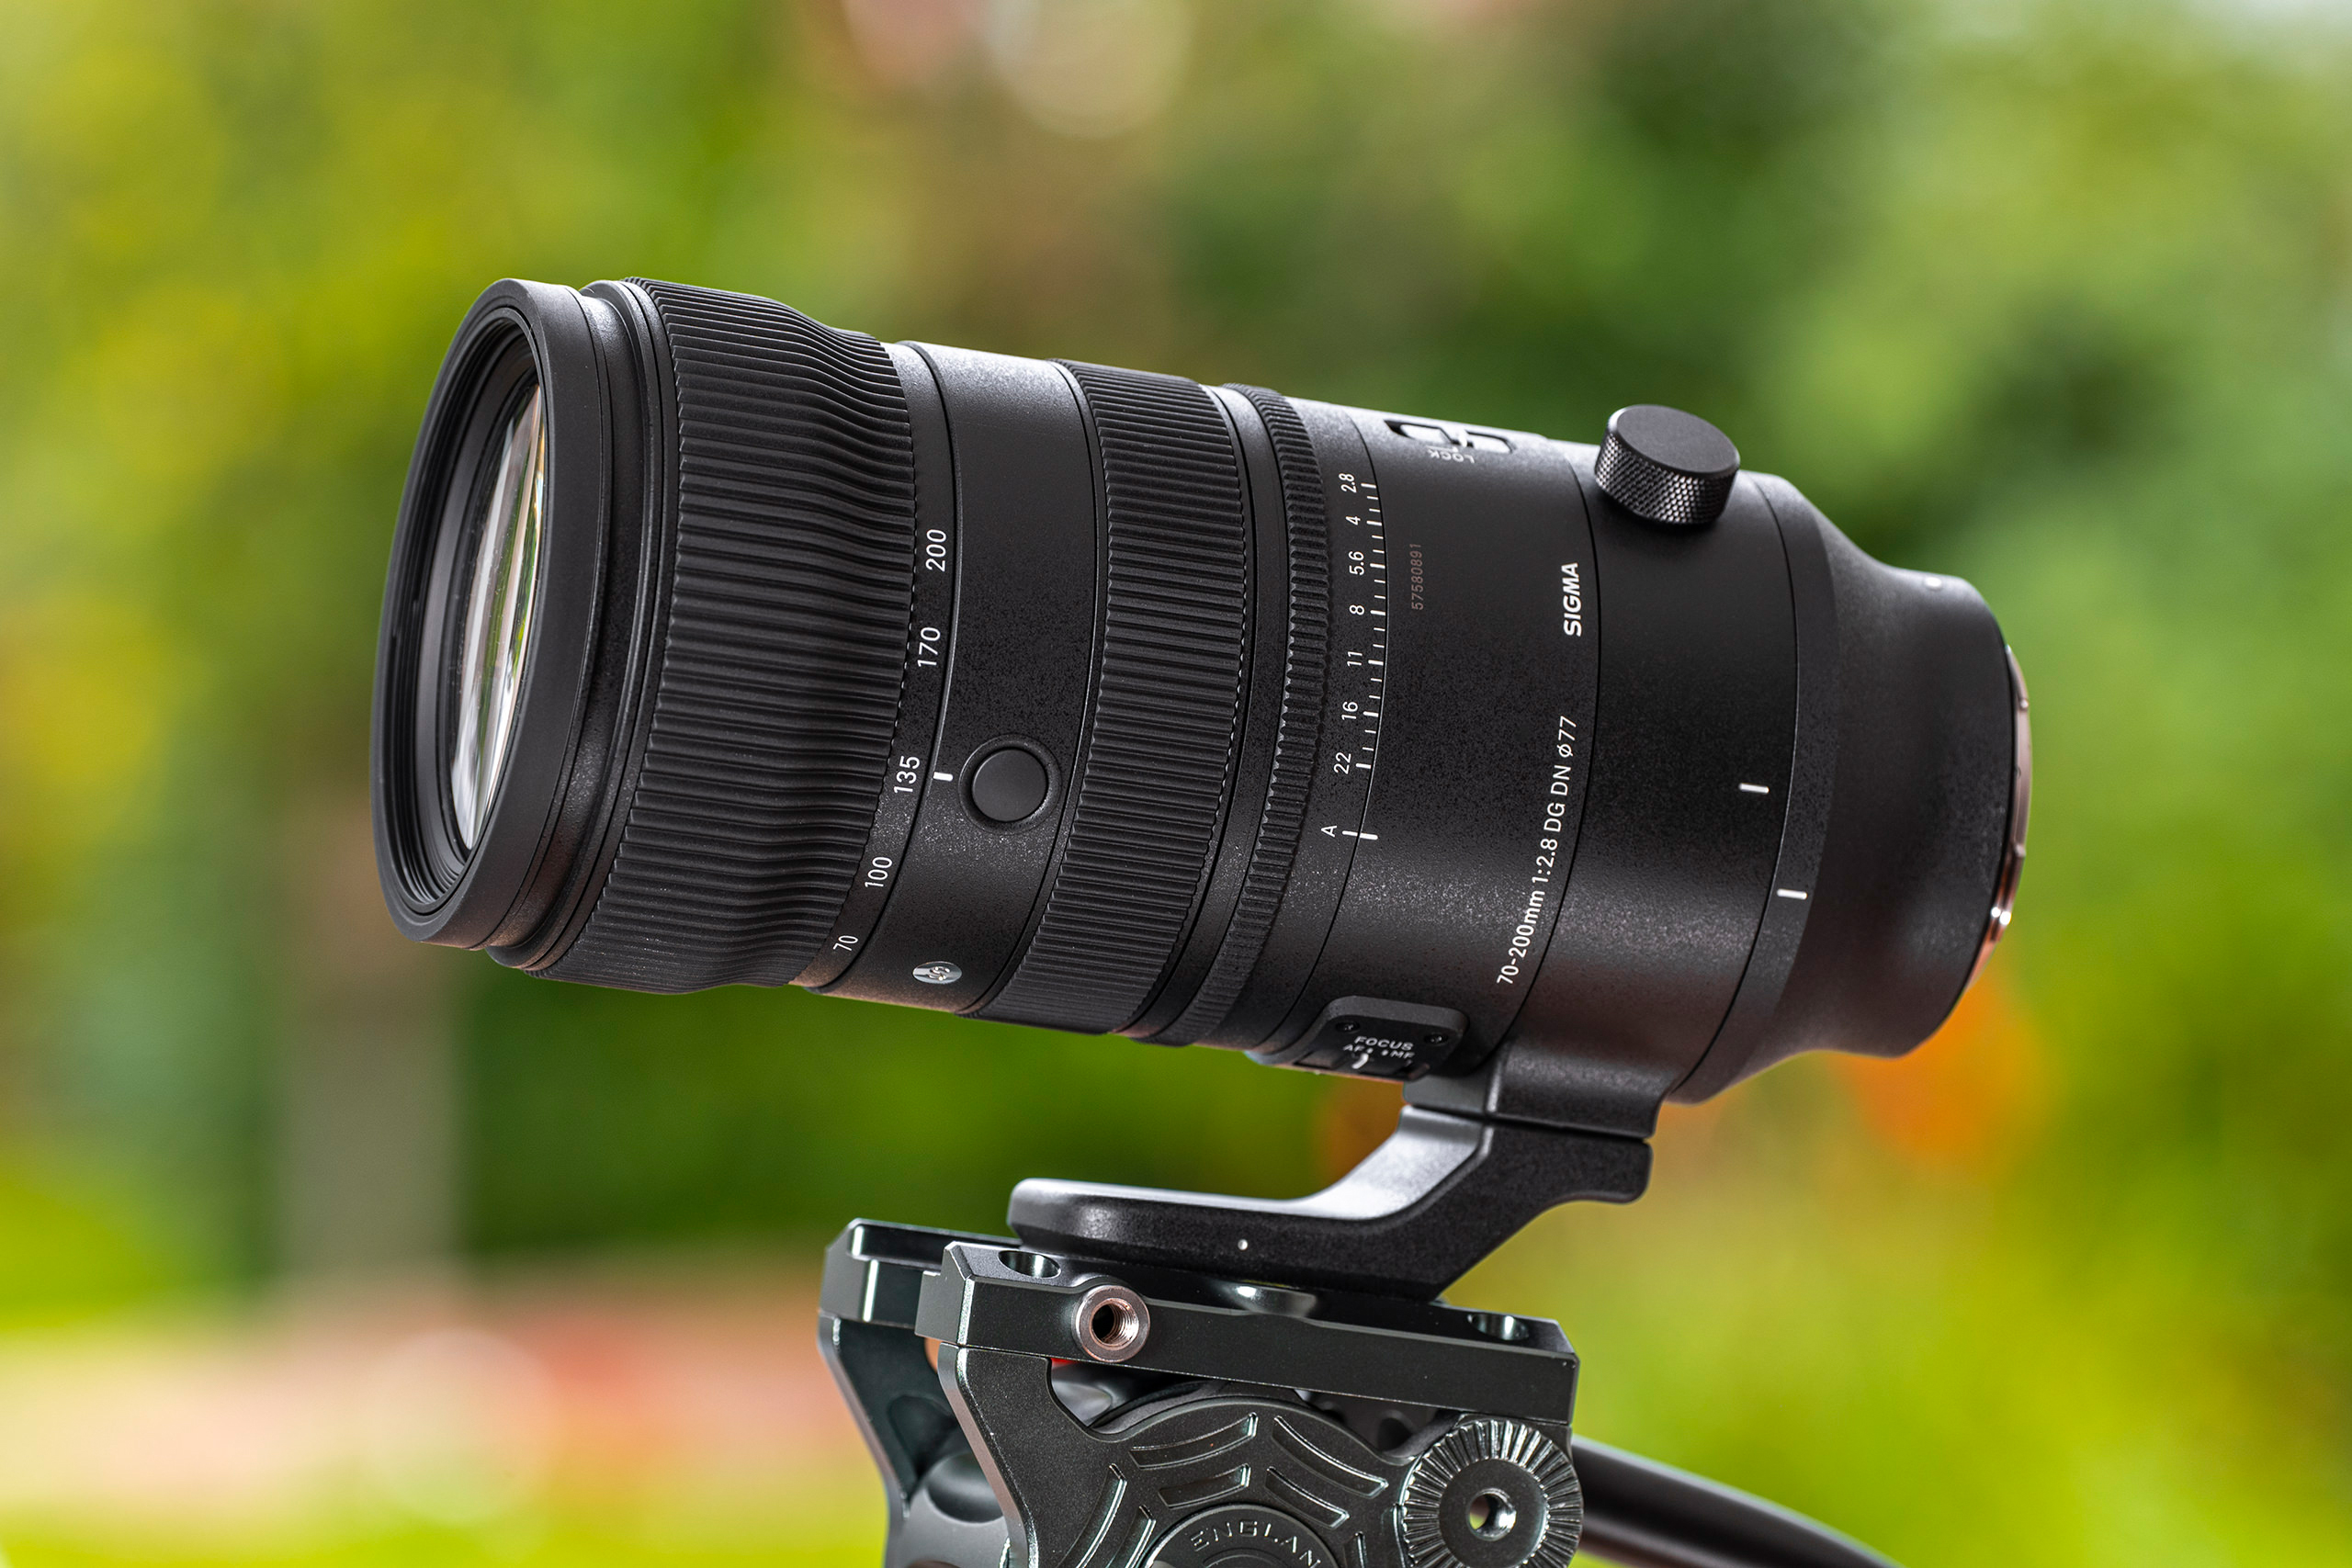 First Look: SIGMA 70-200mm F2.8 DG DN OS Sports Lens for L-Mount